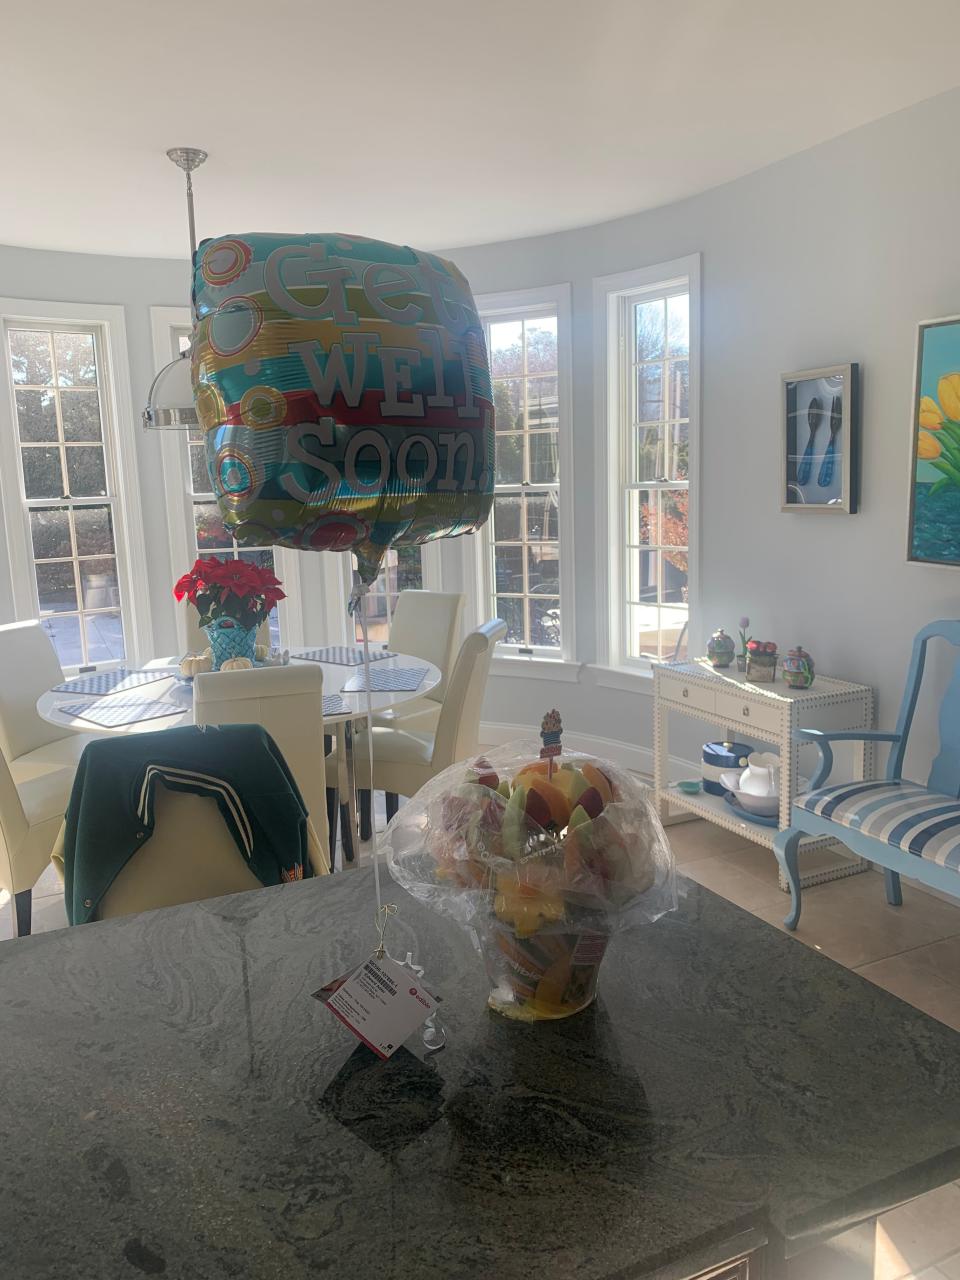 Edward Adler's “get well soon” balloon and the Edible Arrangements. in Southampton, New York, in December 2021.